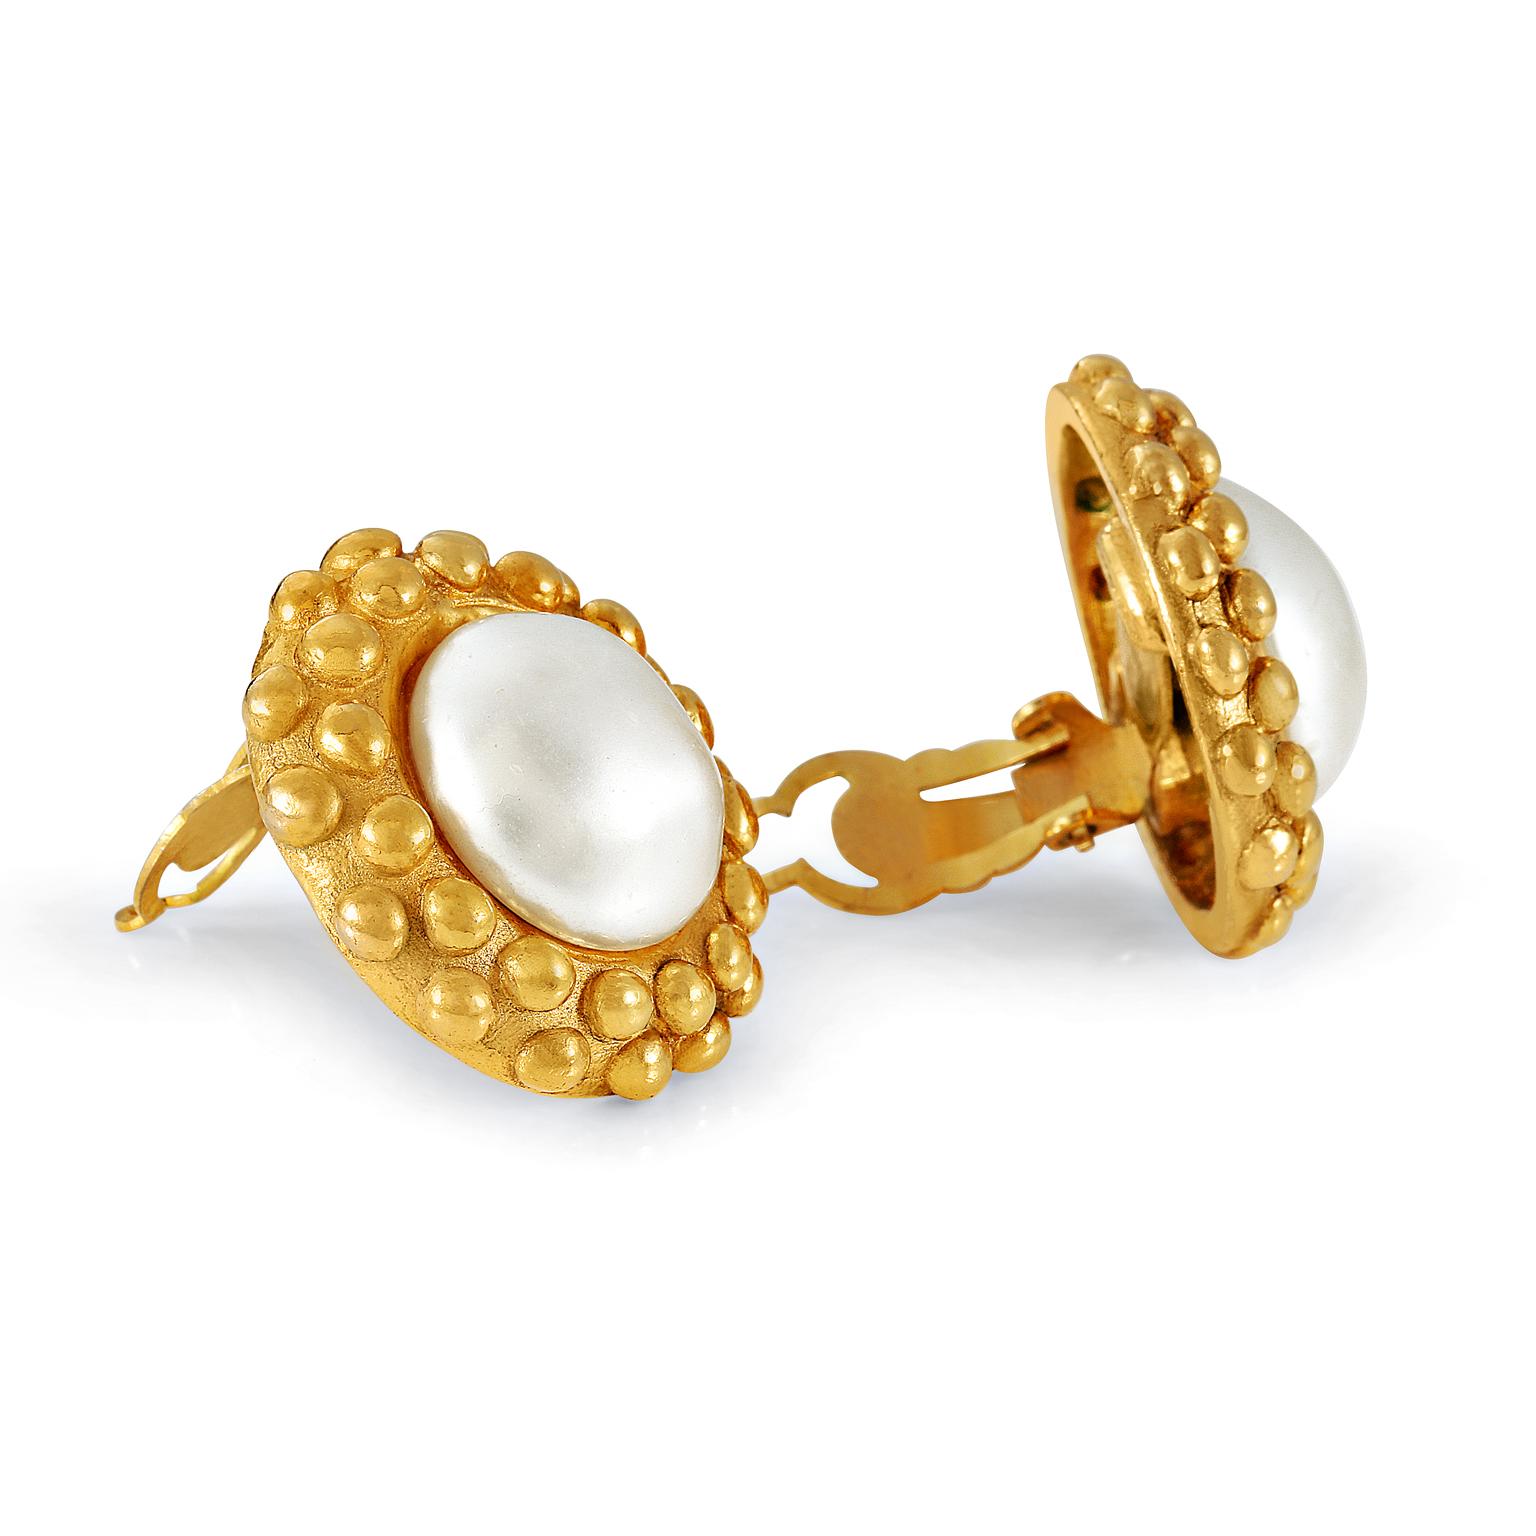 These authentic Chanel Pearl with Raised Dot Earrings are in excellent vintage condition from the 1970’s.  Large round faux pearl is surrounded by gold surround with a double row of raised polka dots.    Clip on closure. Made in France.

